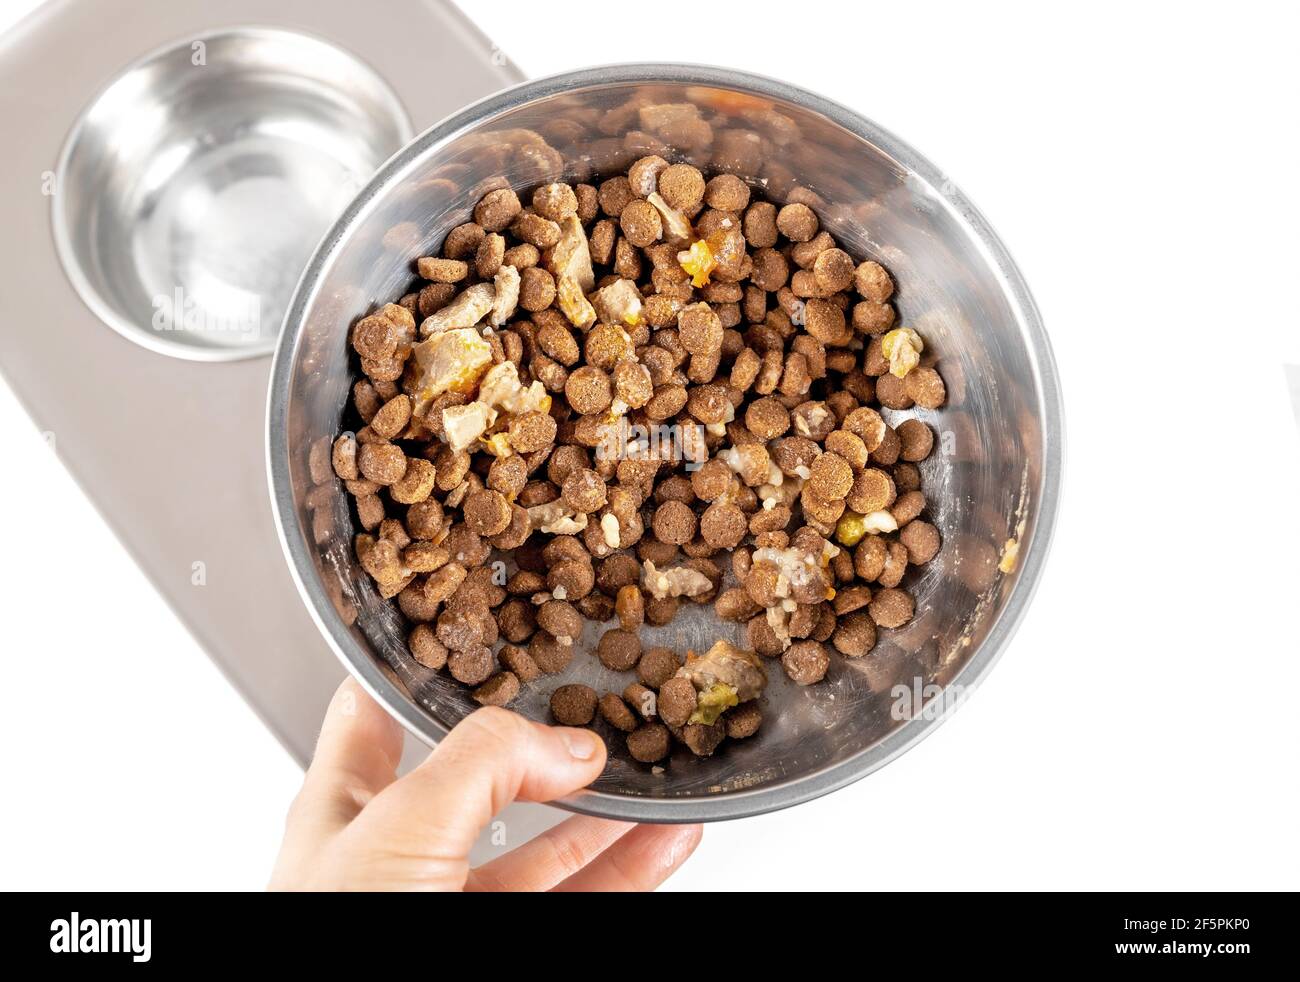 Dog food in bowl for large adult dog. Kibbles mixed with wet food for a picky eater. A hand is holding pet dish on top of a elevated dog feeding stati Stock Photo